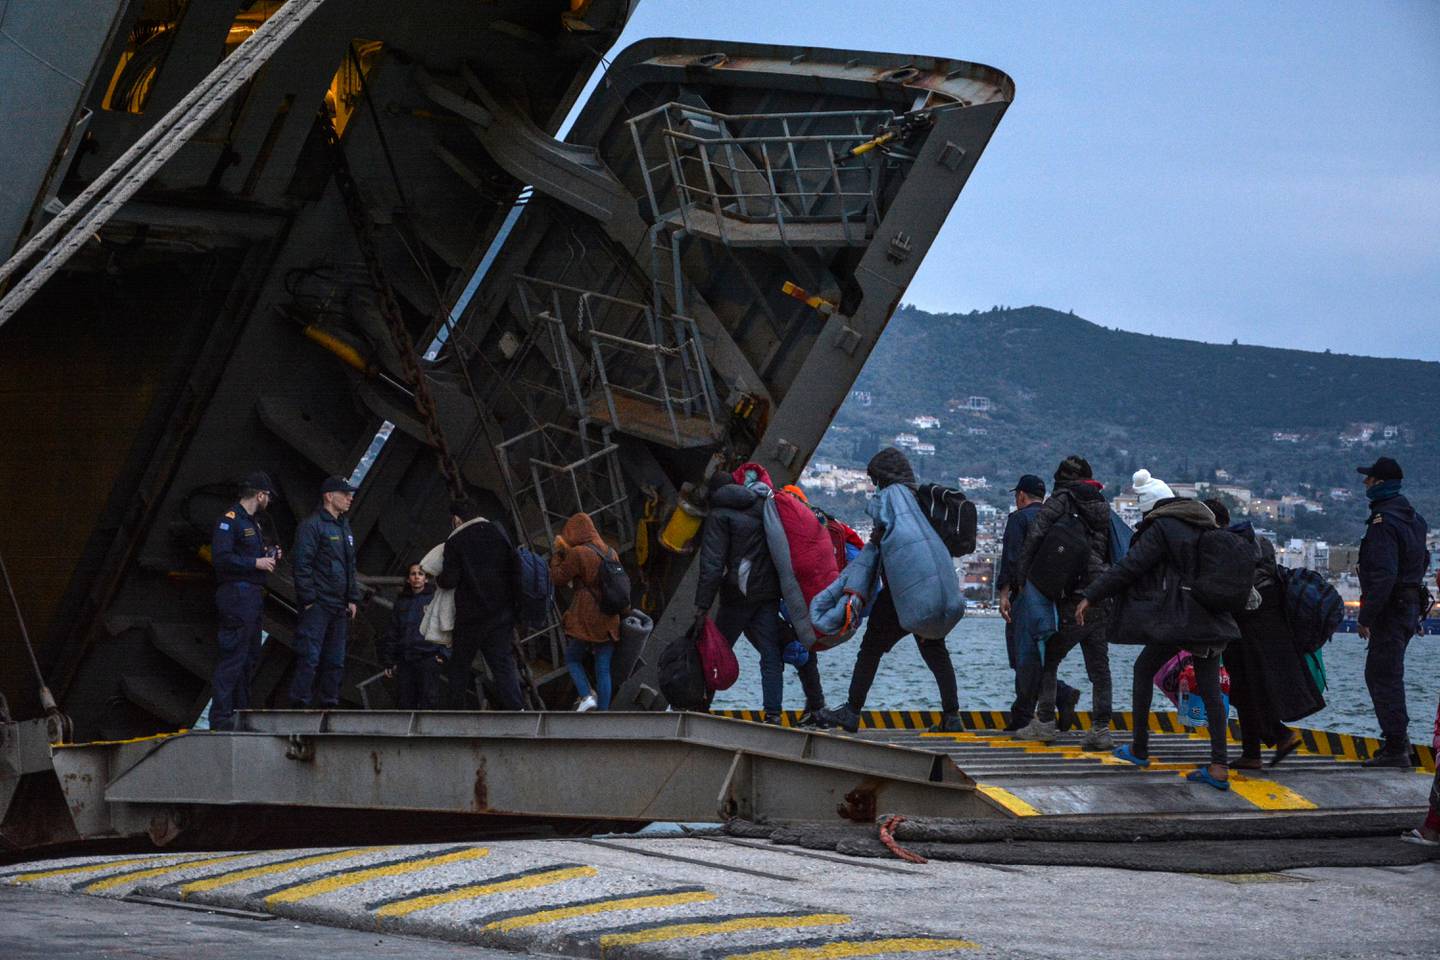 Migrants enter a Greek Navy ship which will accommodate them at the port of Mytilene on the northeastern Aegean island of Lesbos, Greece, on Wednesday, March 4, 2020. Turkey made good on a threat to open its borders and send migrants into Europe last week. In the past few days hundreds of people have headed to Greek islands from the nearby Turkish coast in dinghies. (AP Photo/Panagiotis Balaskas)